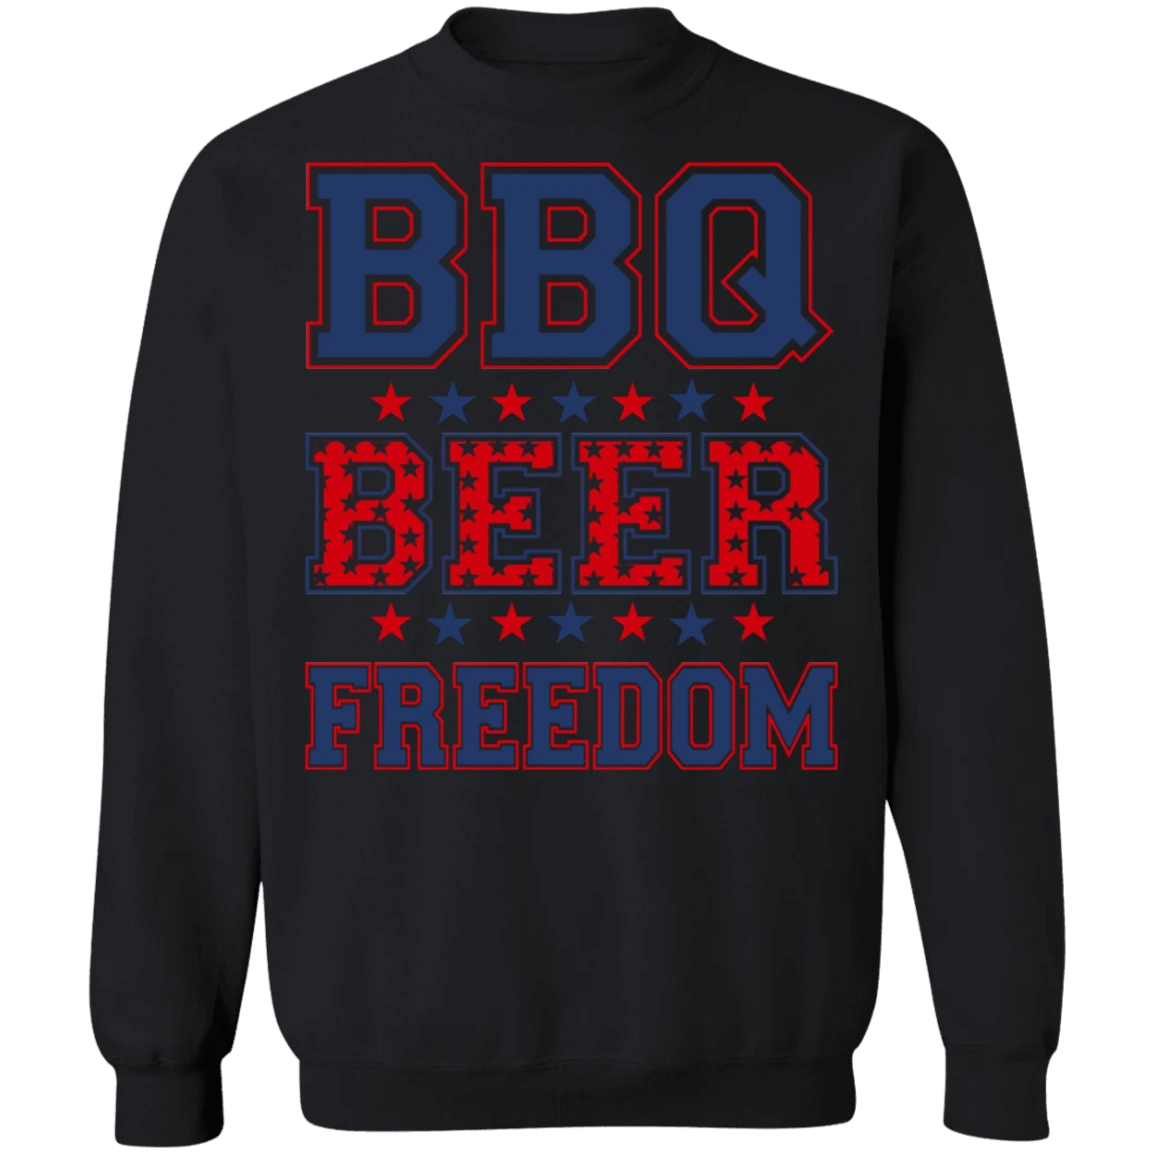 BBQ Beer Freedom Sweatshirt Gift For Grill Lovers Beer Drinkers Related Present